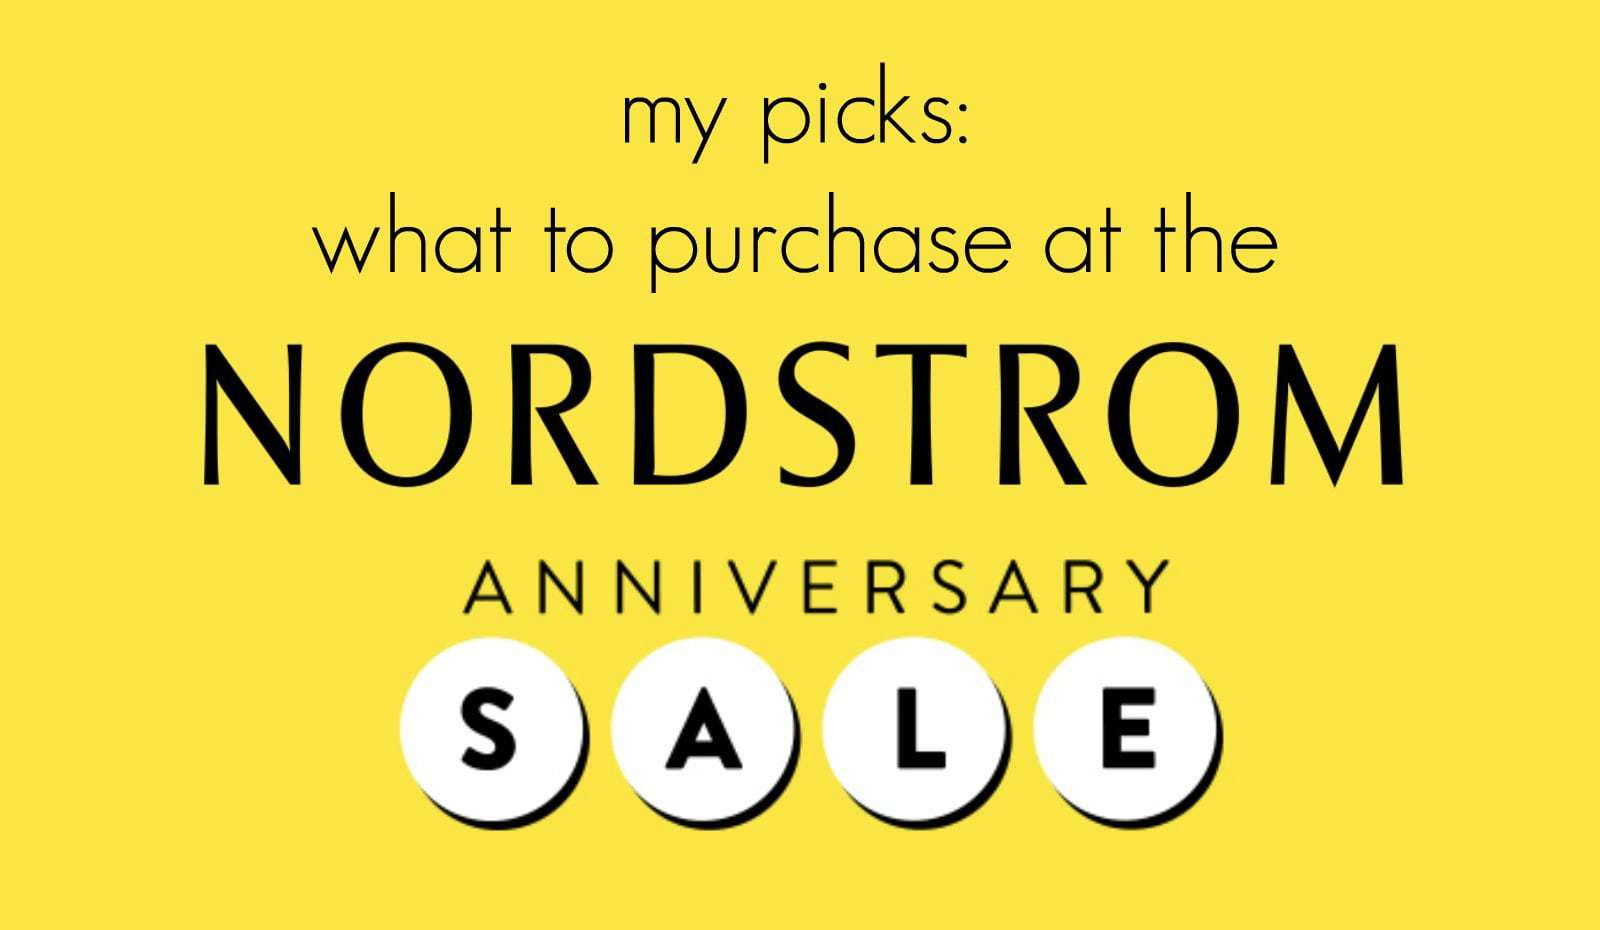 The Ultimate Nordstrom Anniversary Sale Shopping Guide! The best buys at the sale in all the categories by Wardrobe Oxygen